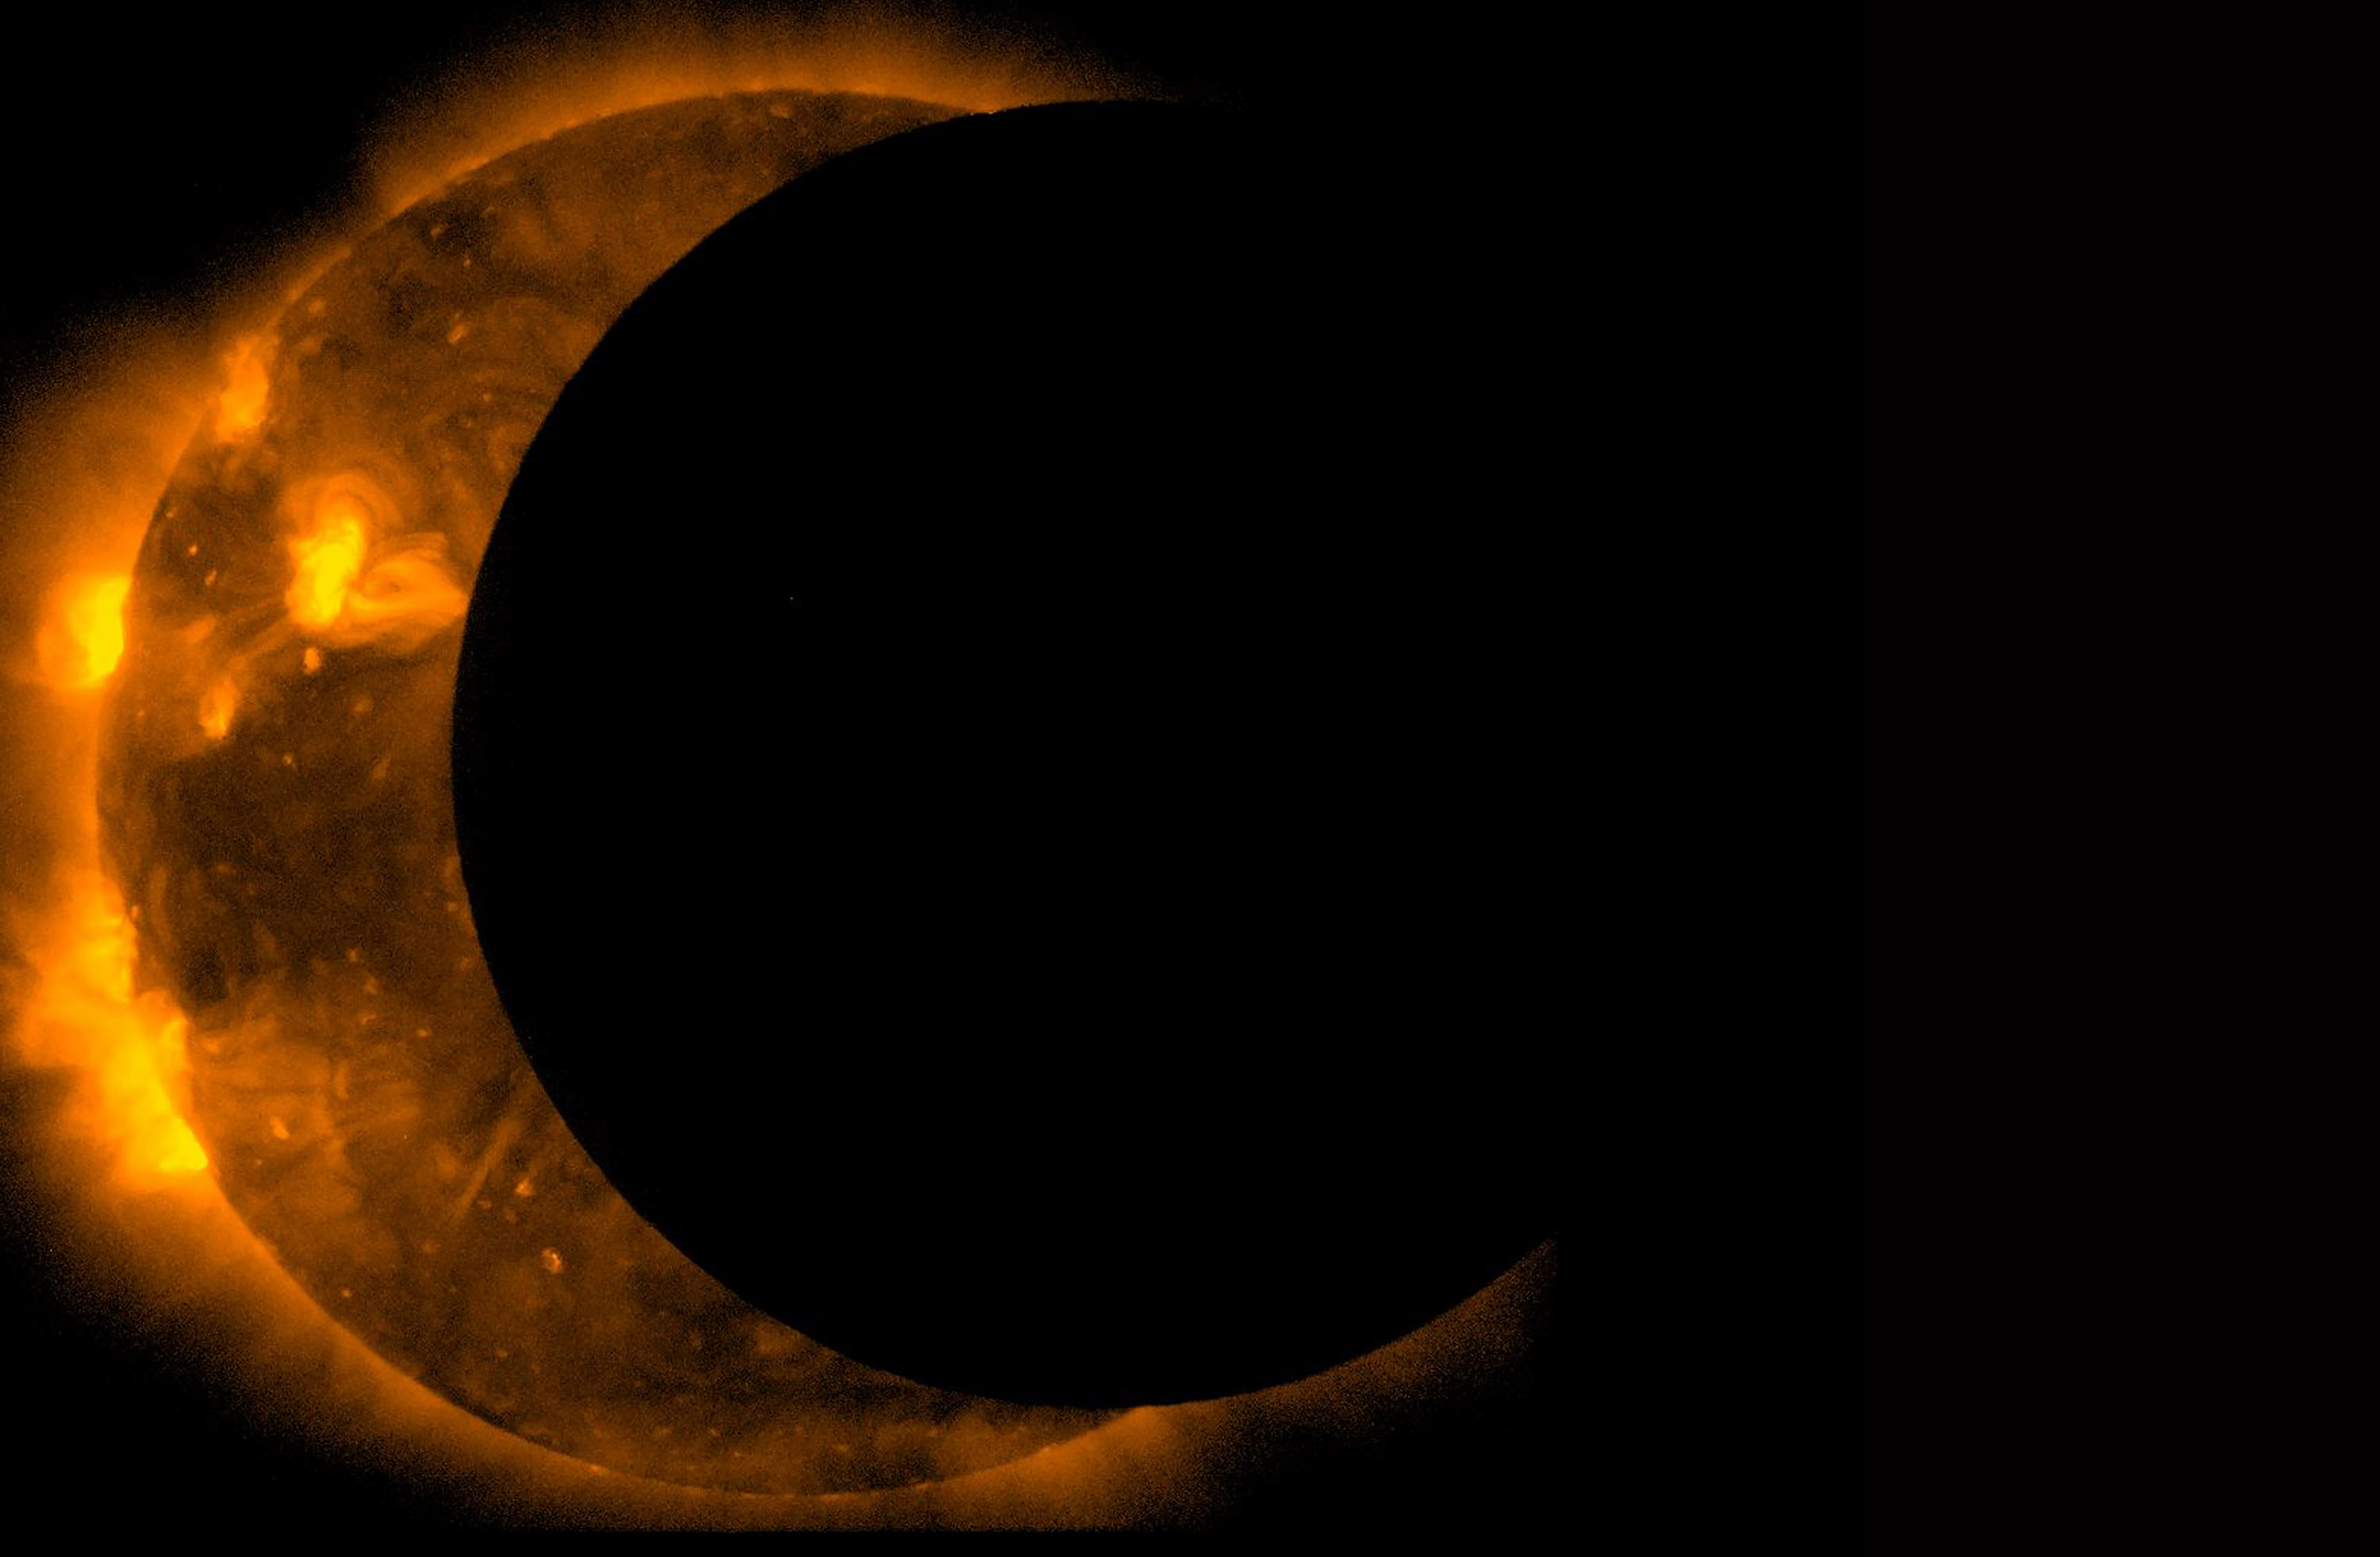 A partial solar eclipse is shown in this Sept. 13, 2015, image released by NASA. A total solar eclipse will occur over North America on Aug. 21. Photo courtesy of NASA.